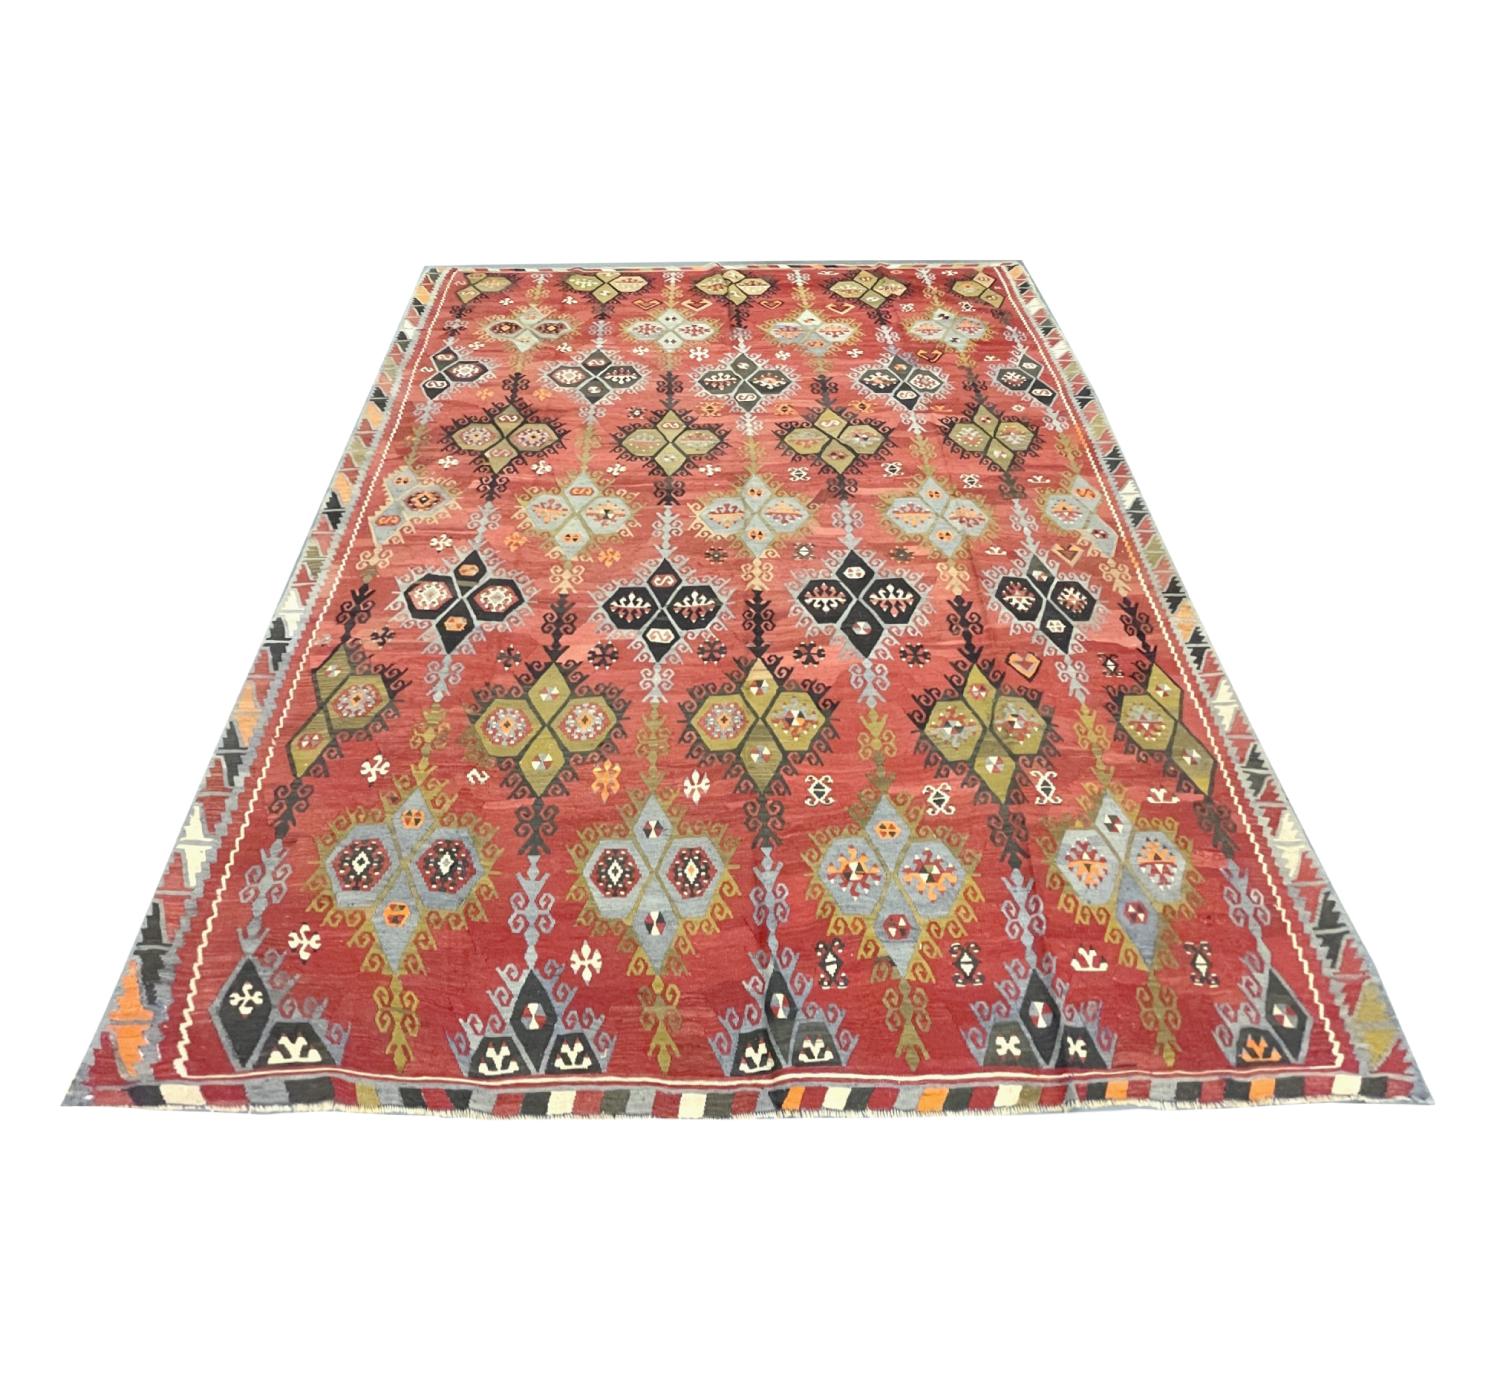 The handmade carpet Sarkilsa Kilim rugs are one of the most decorative oriental rugs, Turkish Kilim can be an additional element of design to one's home decor.
Most Kilims can always be in harmony with the interior and will be complementary with art